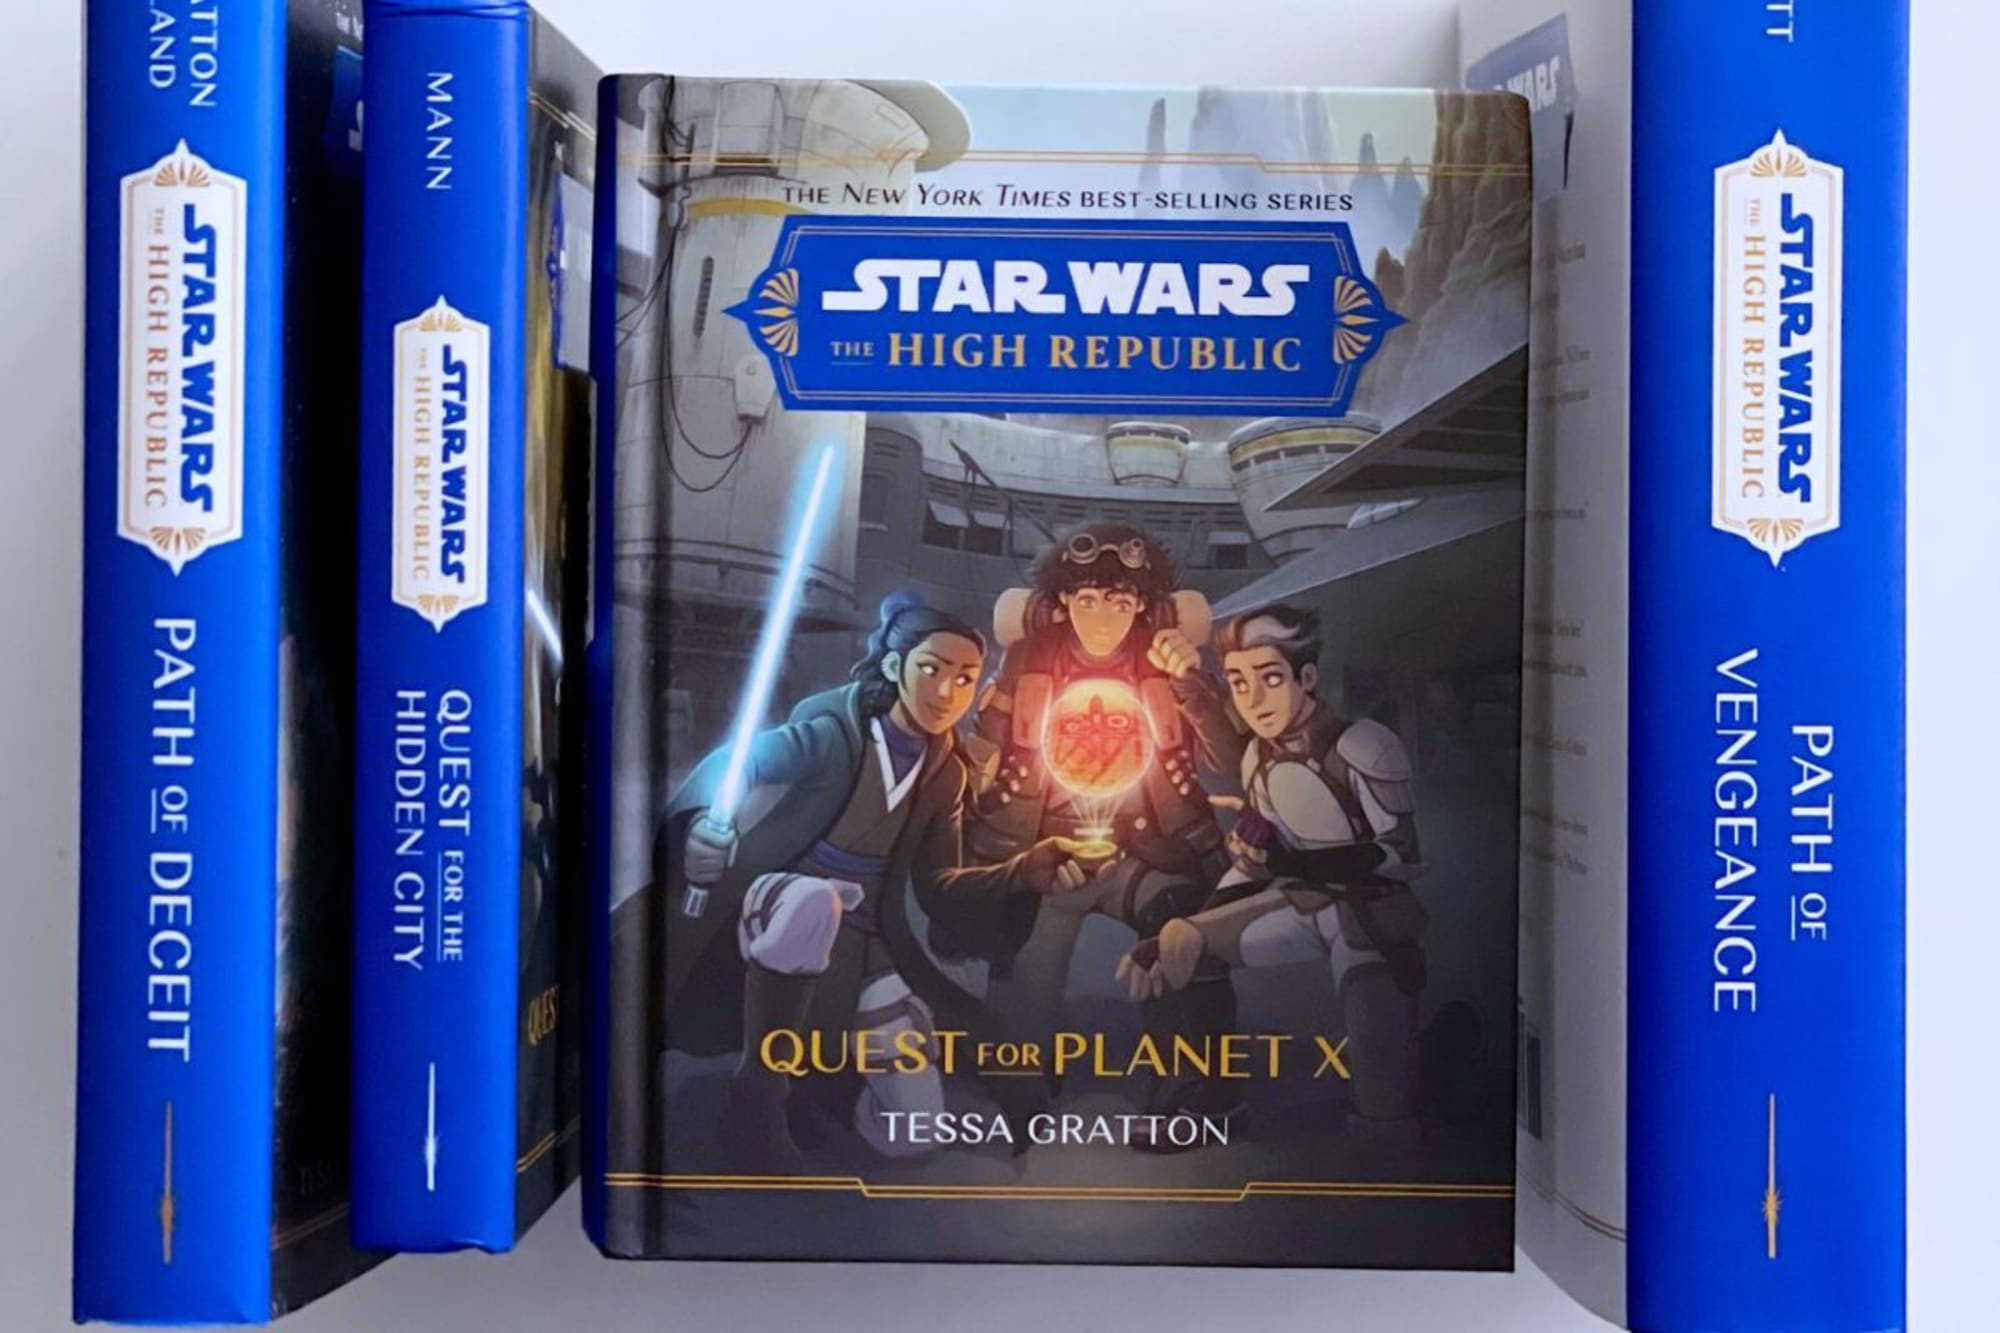 Quest for Planet X: A can't-miss High Republic read for all ages